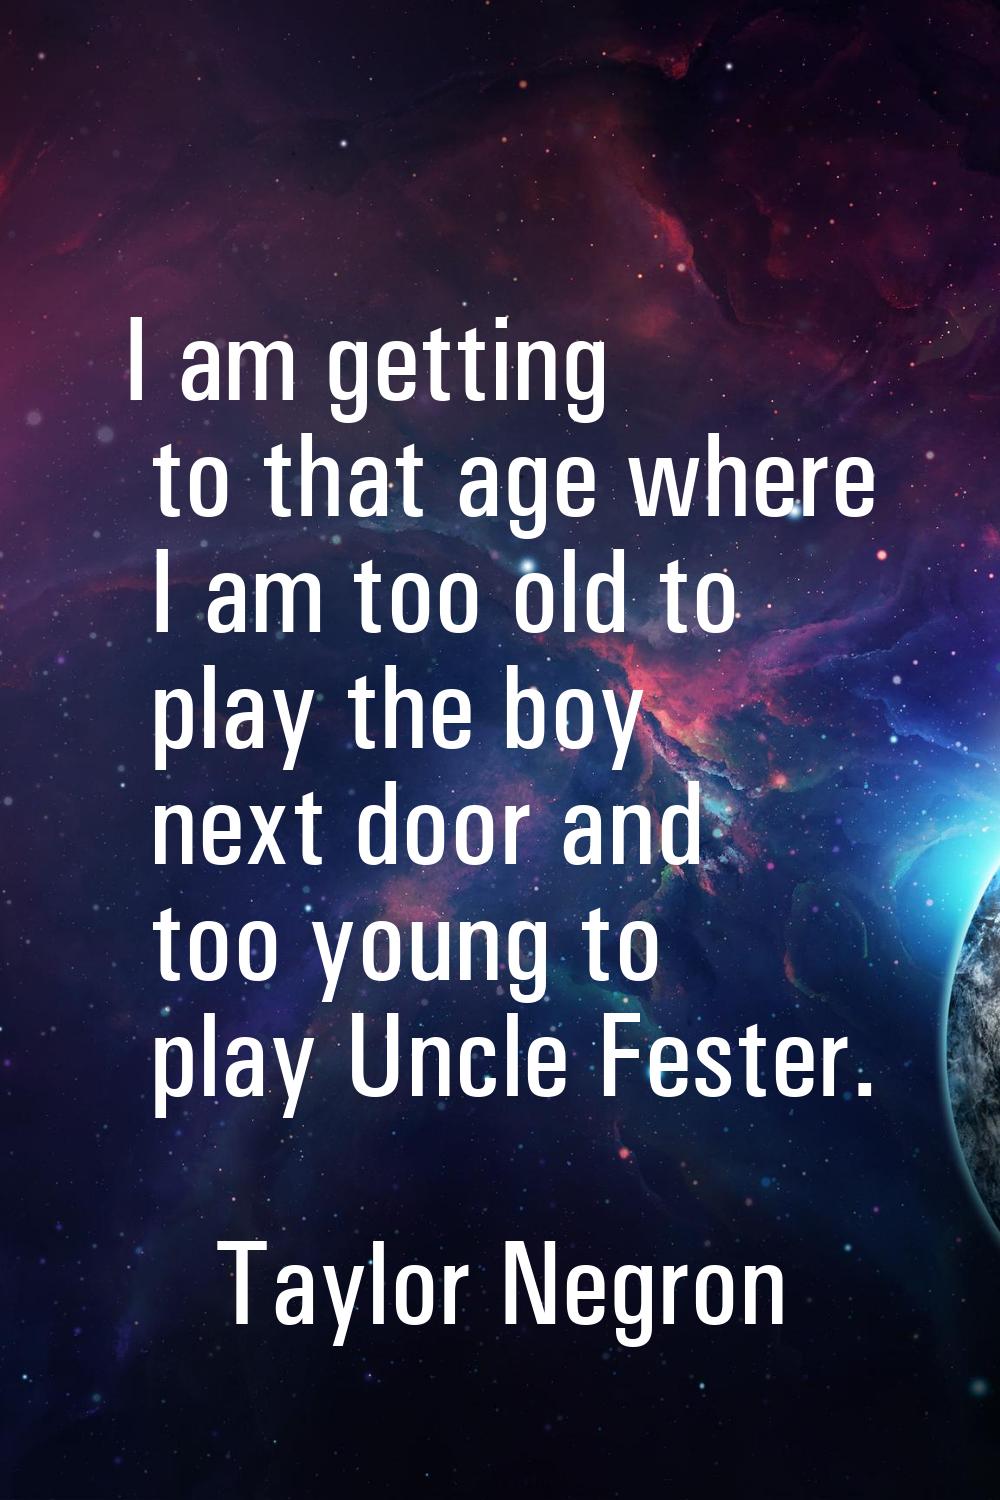 I am getting to that age where I am too old to play the boy next door and too young to play Uncle F